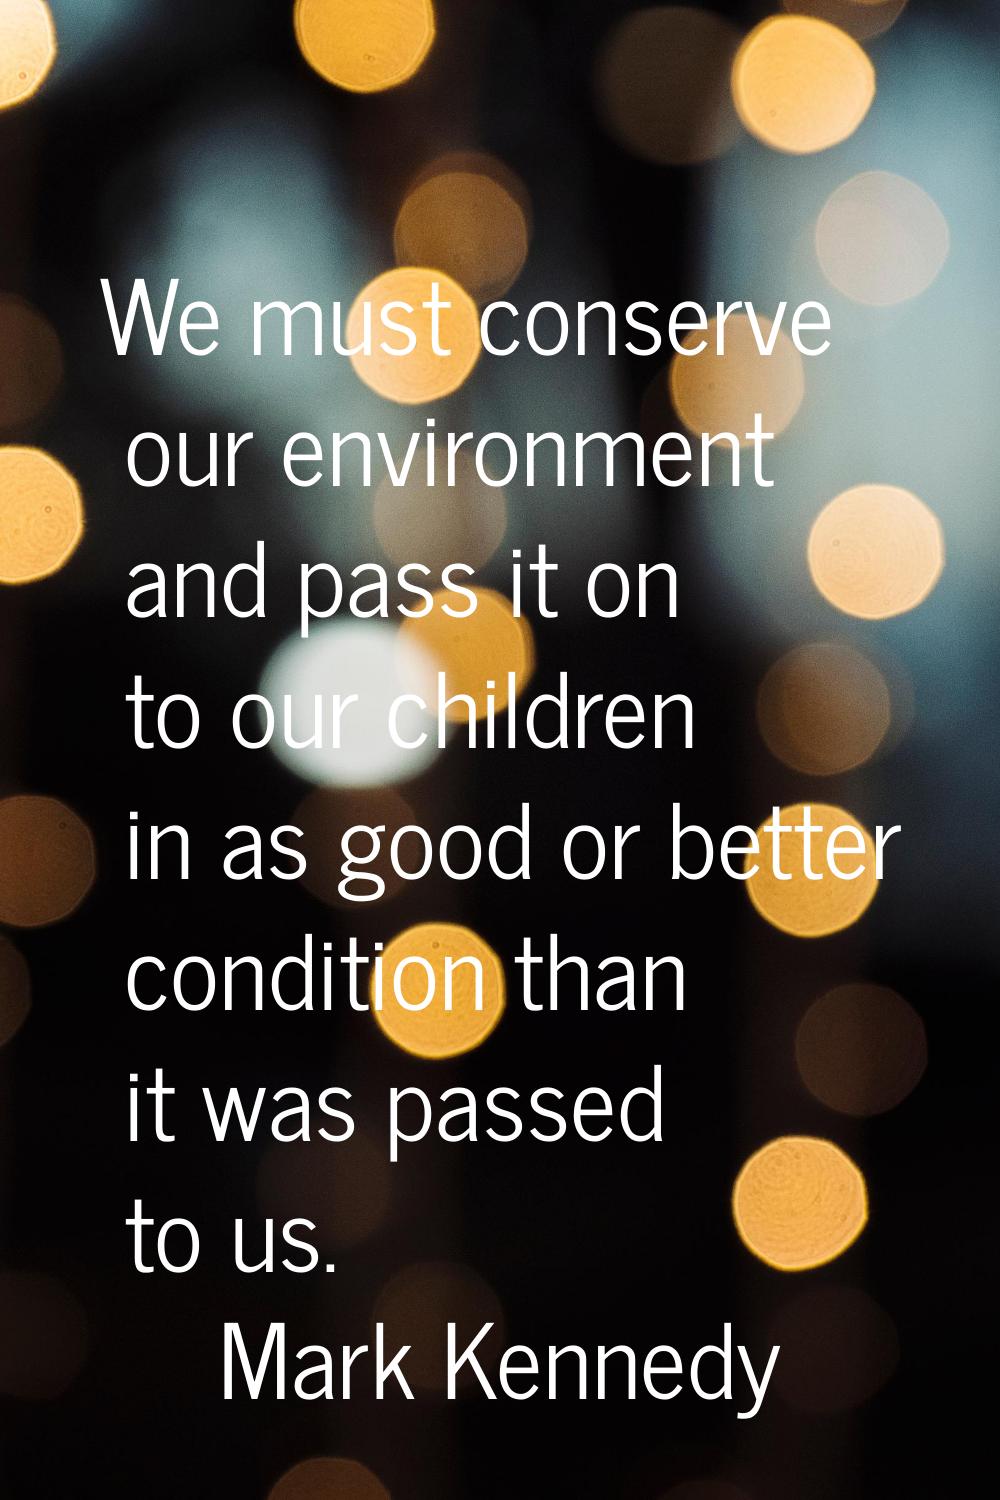 We must conserve our environment and pass it on to our children in as good or better condition than